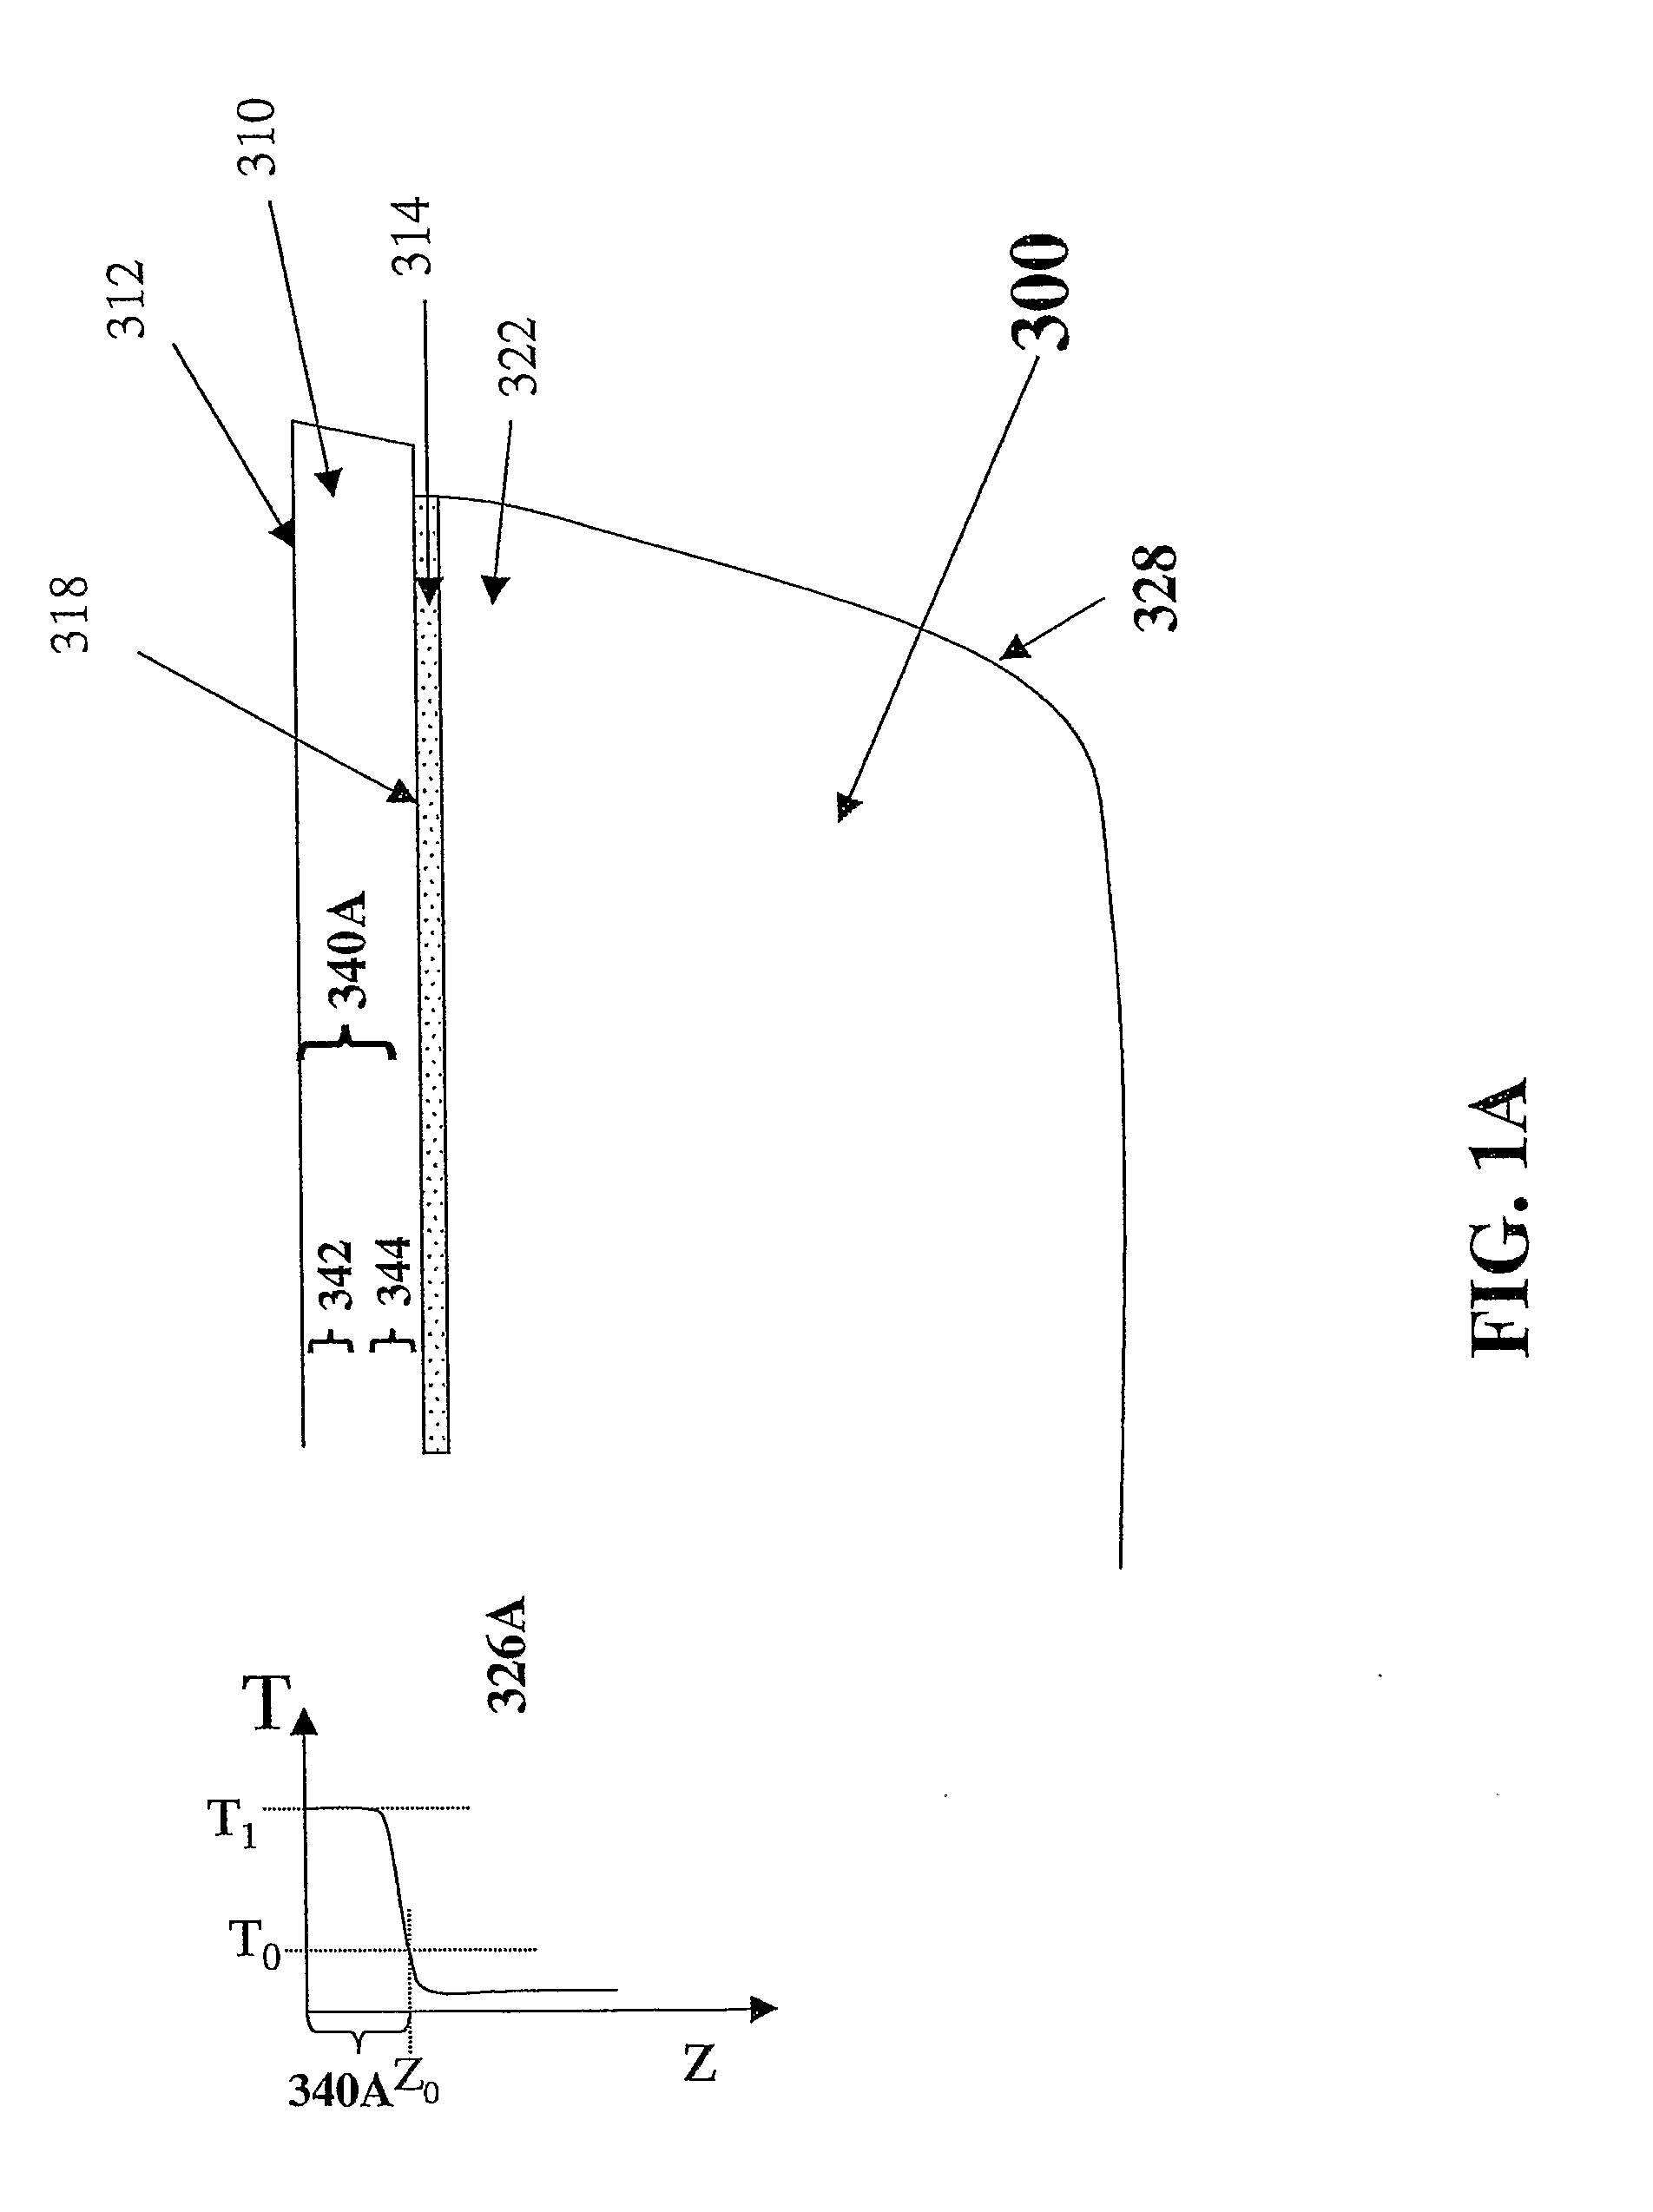 Method and apparatus for treating a fungal nail infection with shortwave and/or microwave radiation